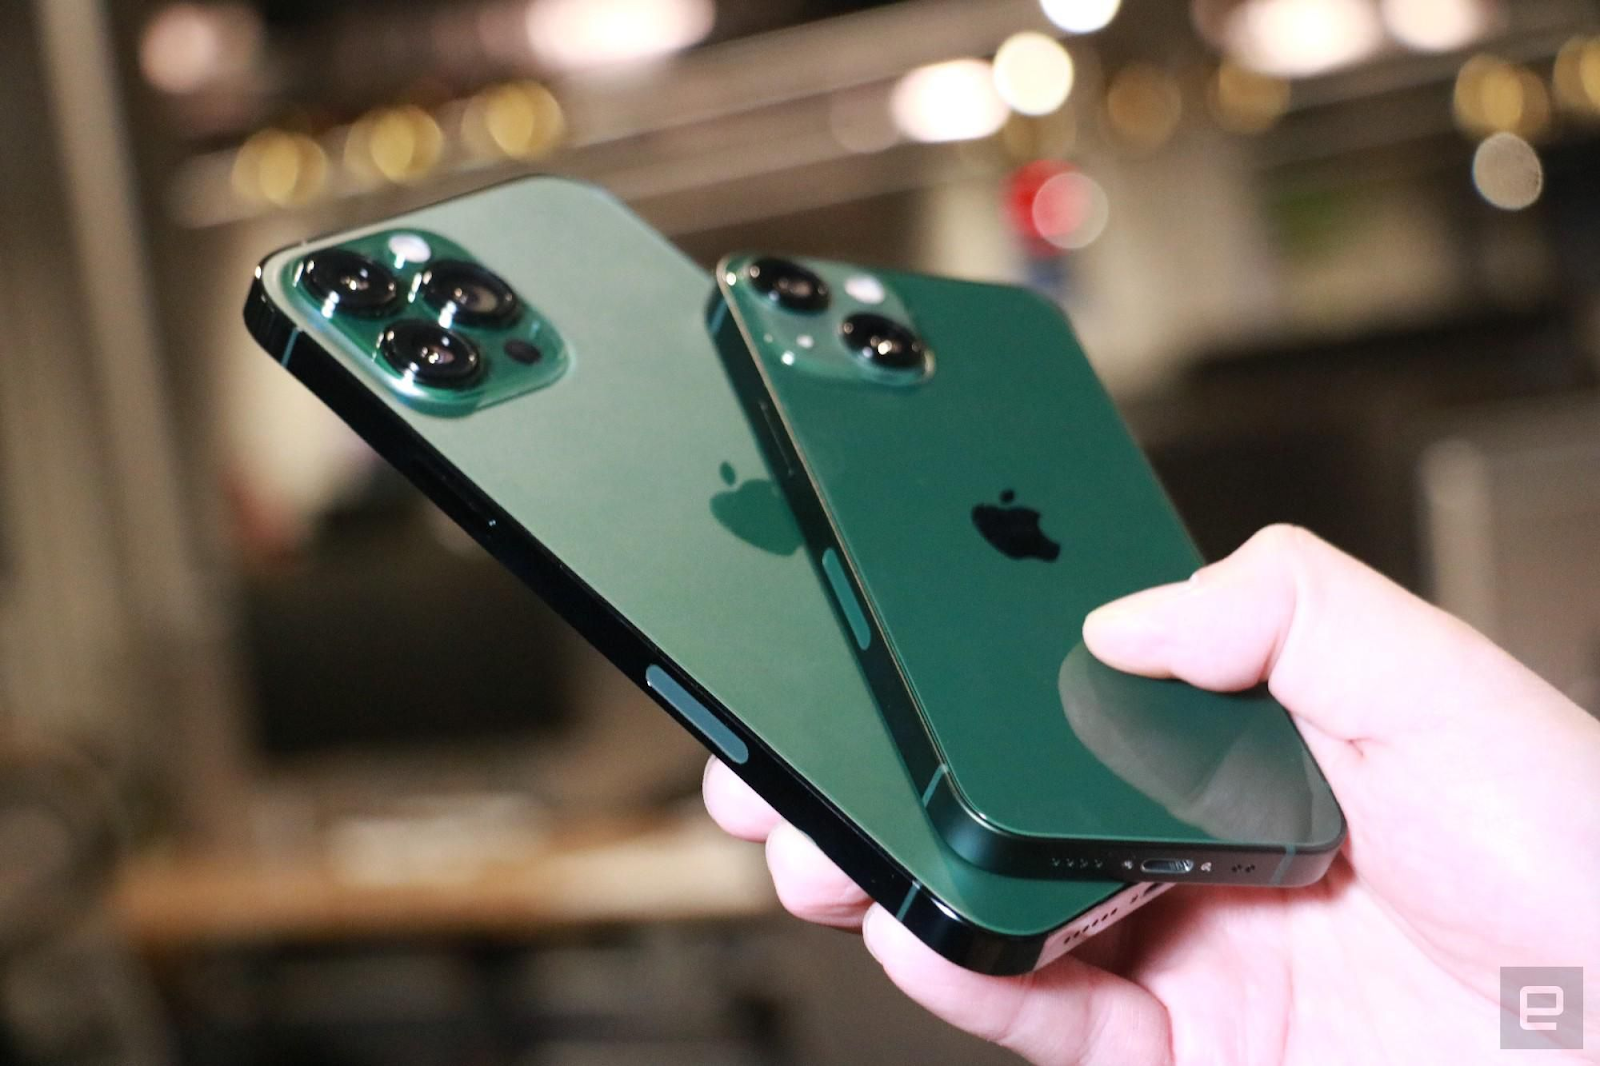 This image shows the two iPhone 13 Pro green each other.